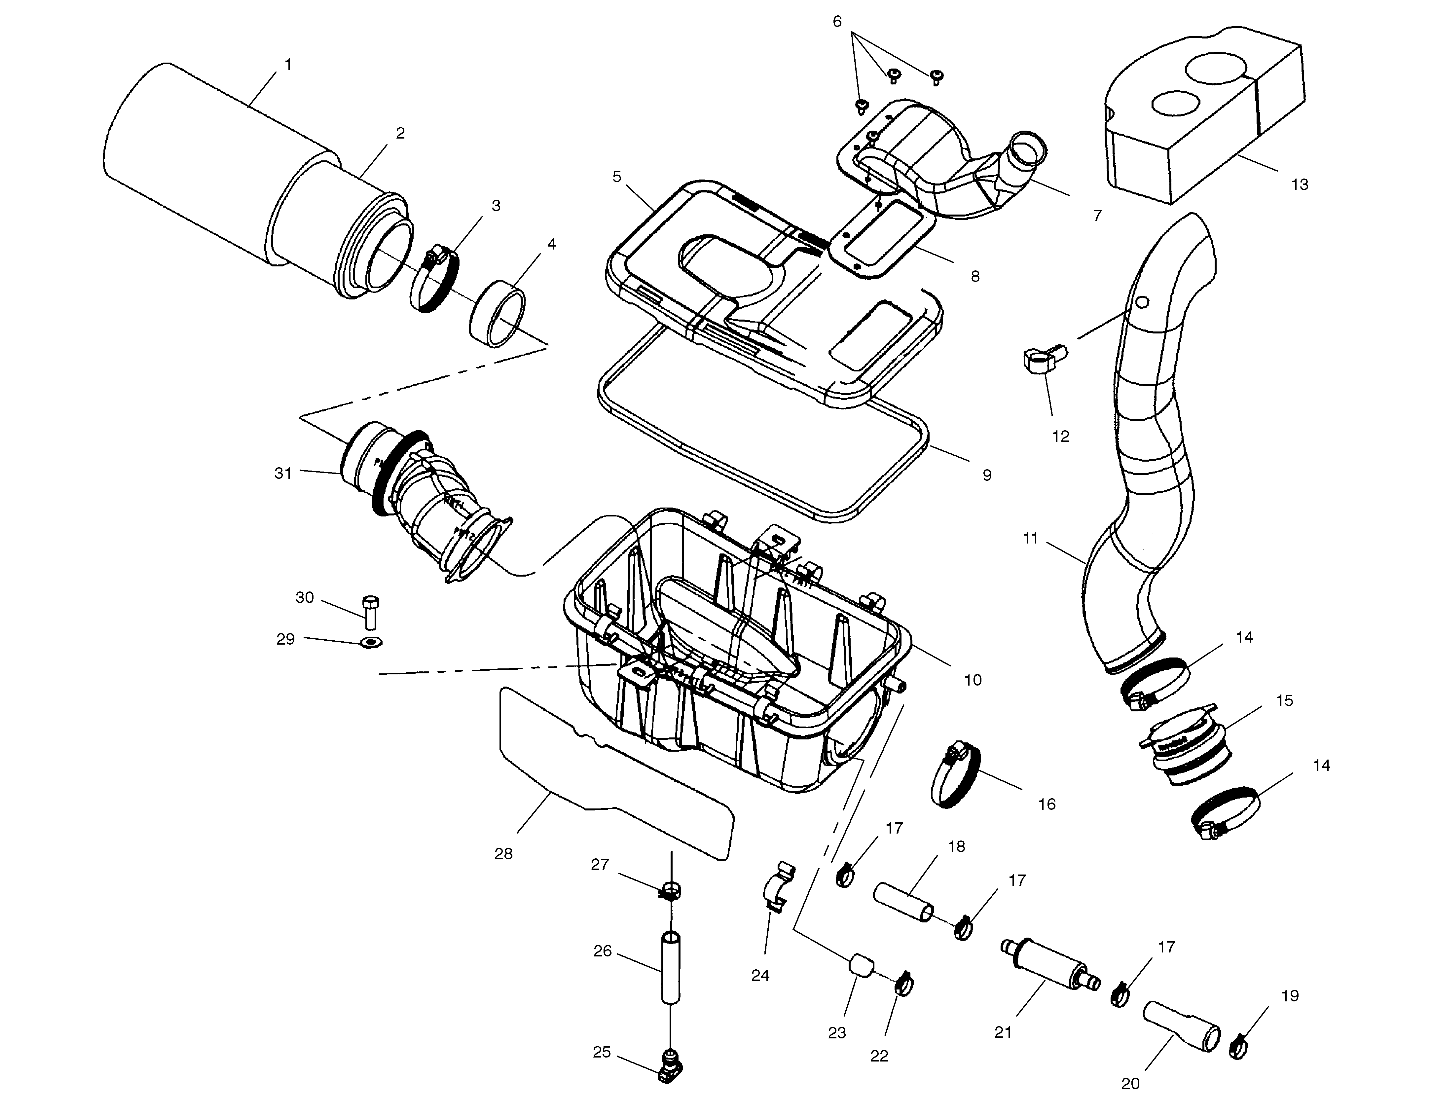 Part Number : 5434013 DUCT-AIR INTAKE